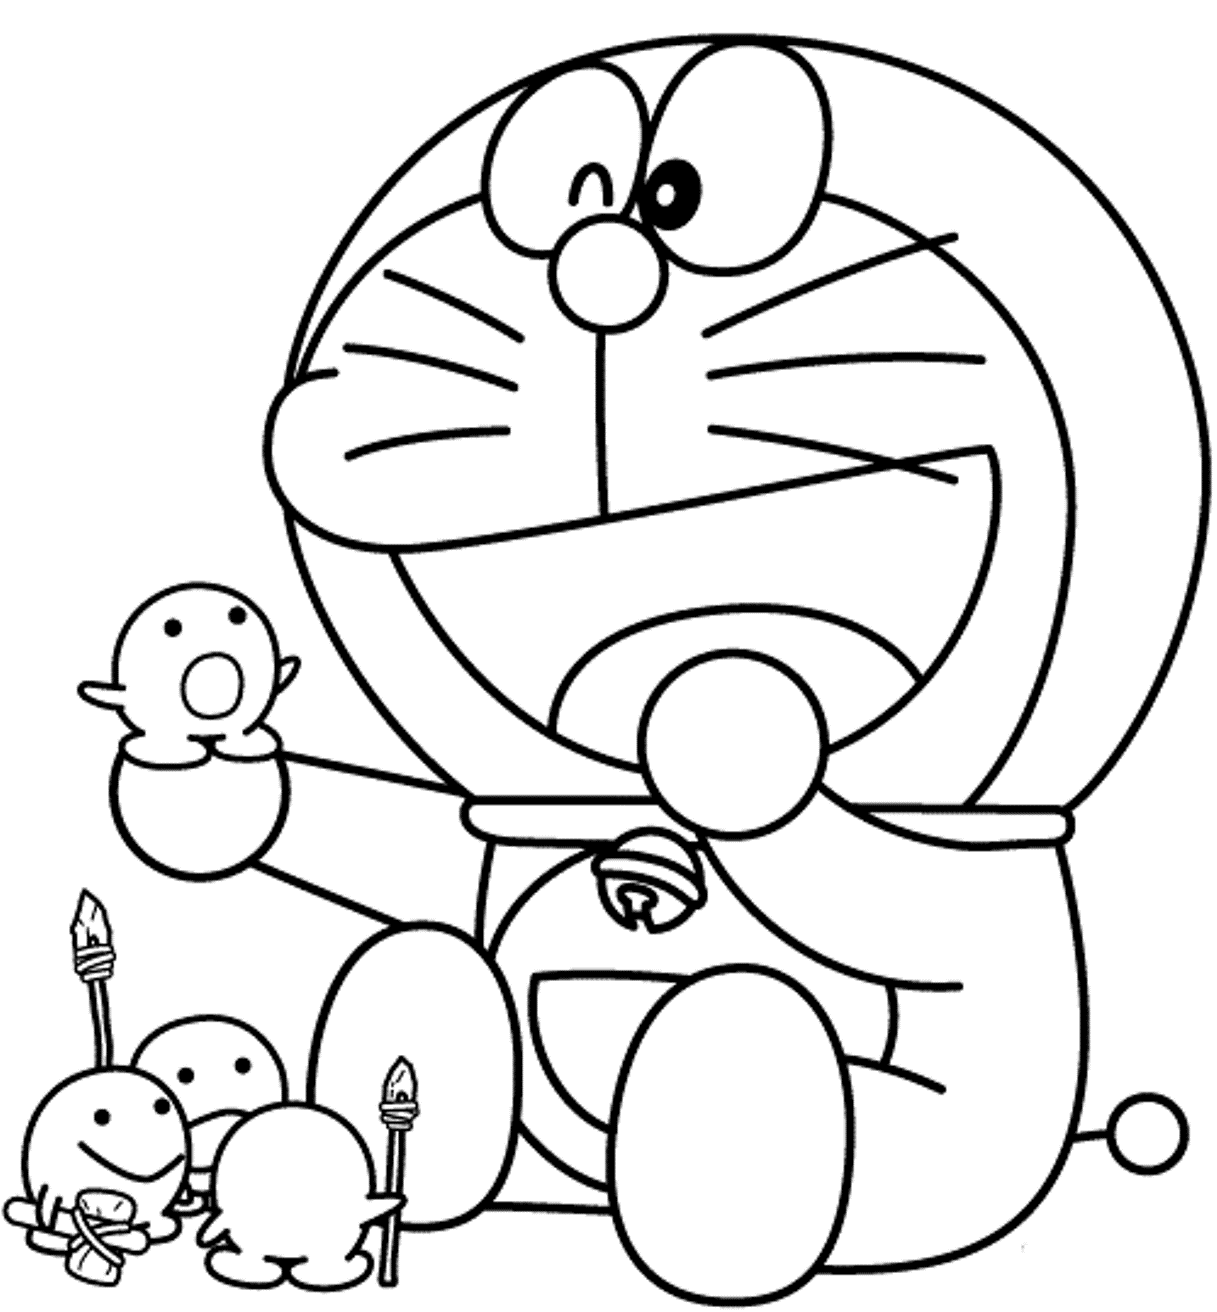 Doraemon and his Toys Coloring Page   Free Printable Coloring ...